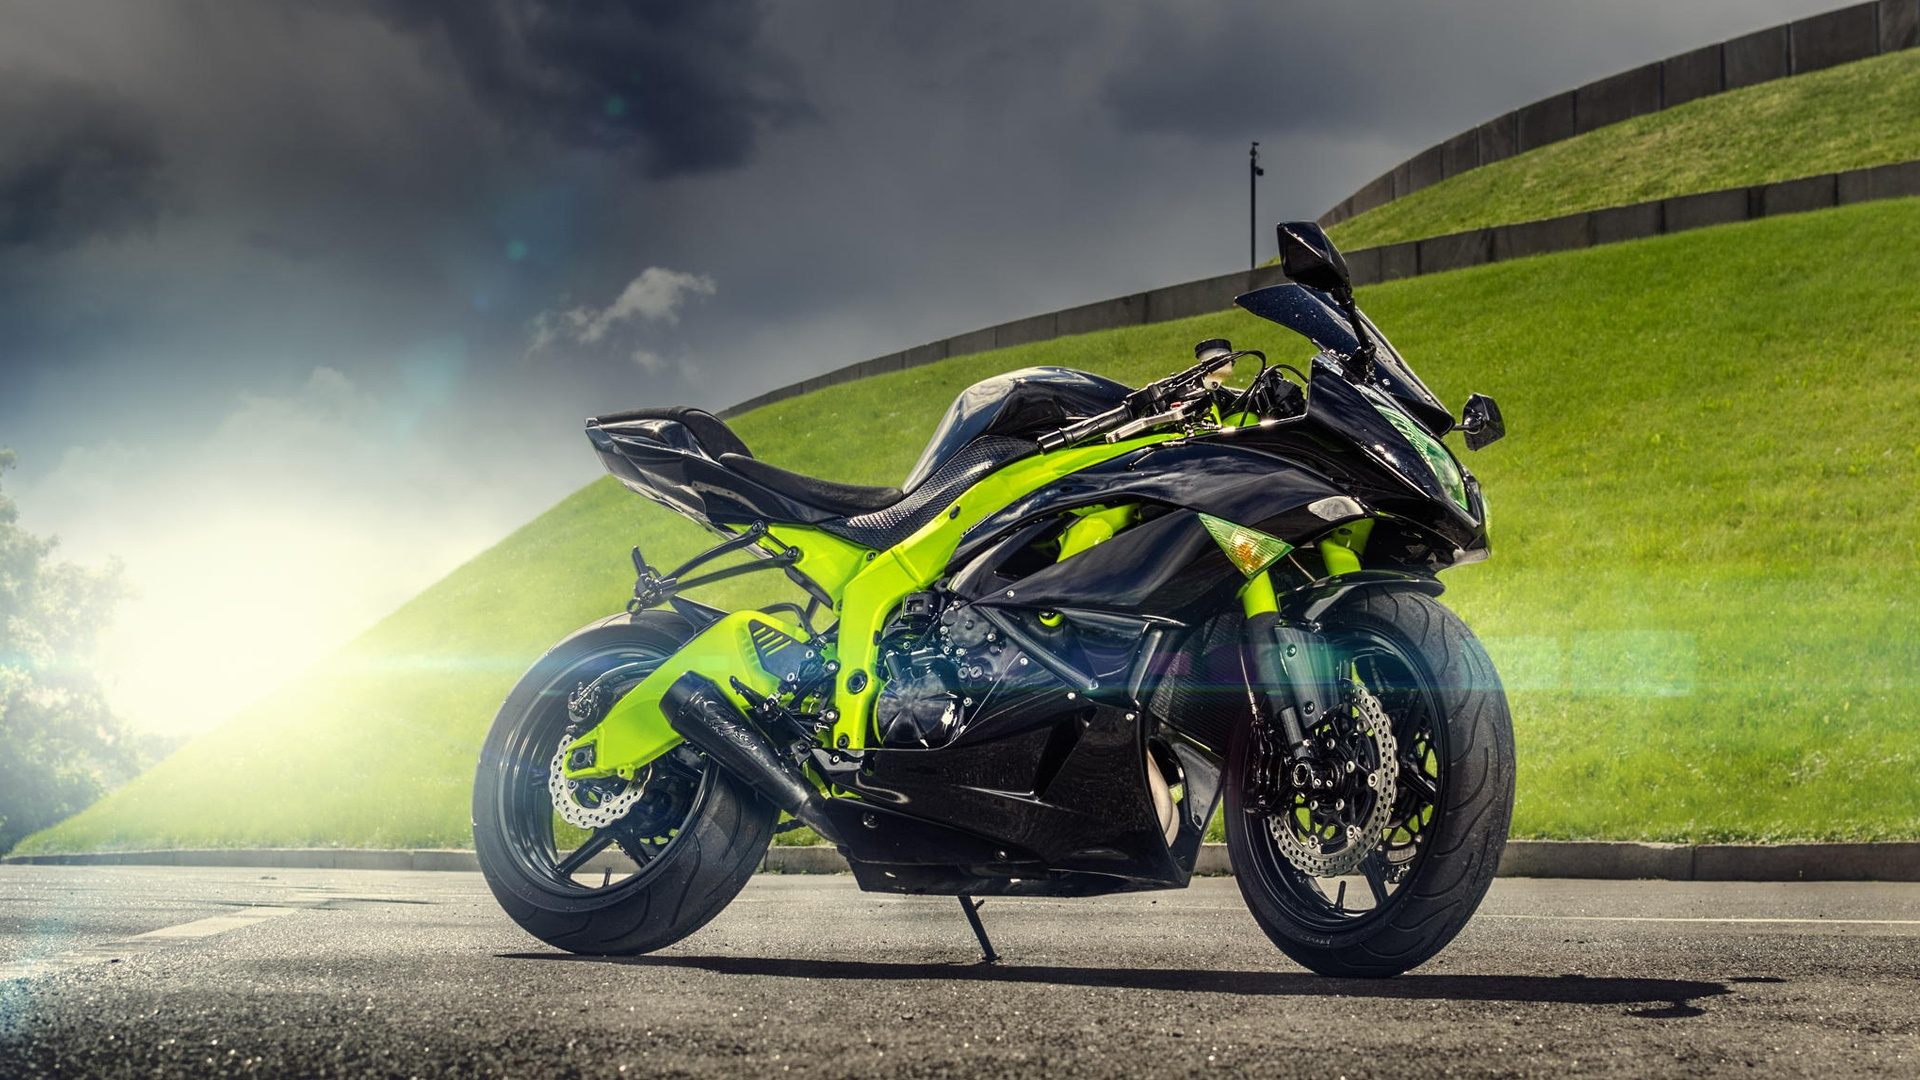 Zx6r Wallpapers Group 69